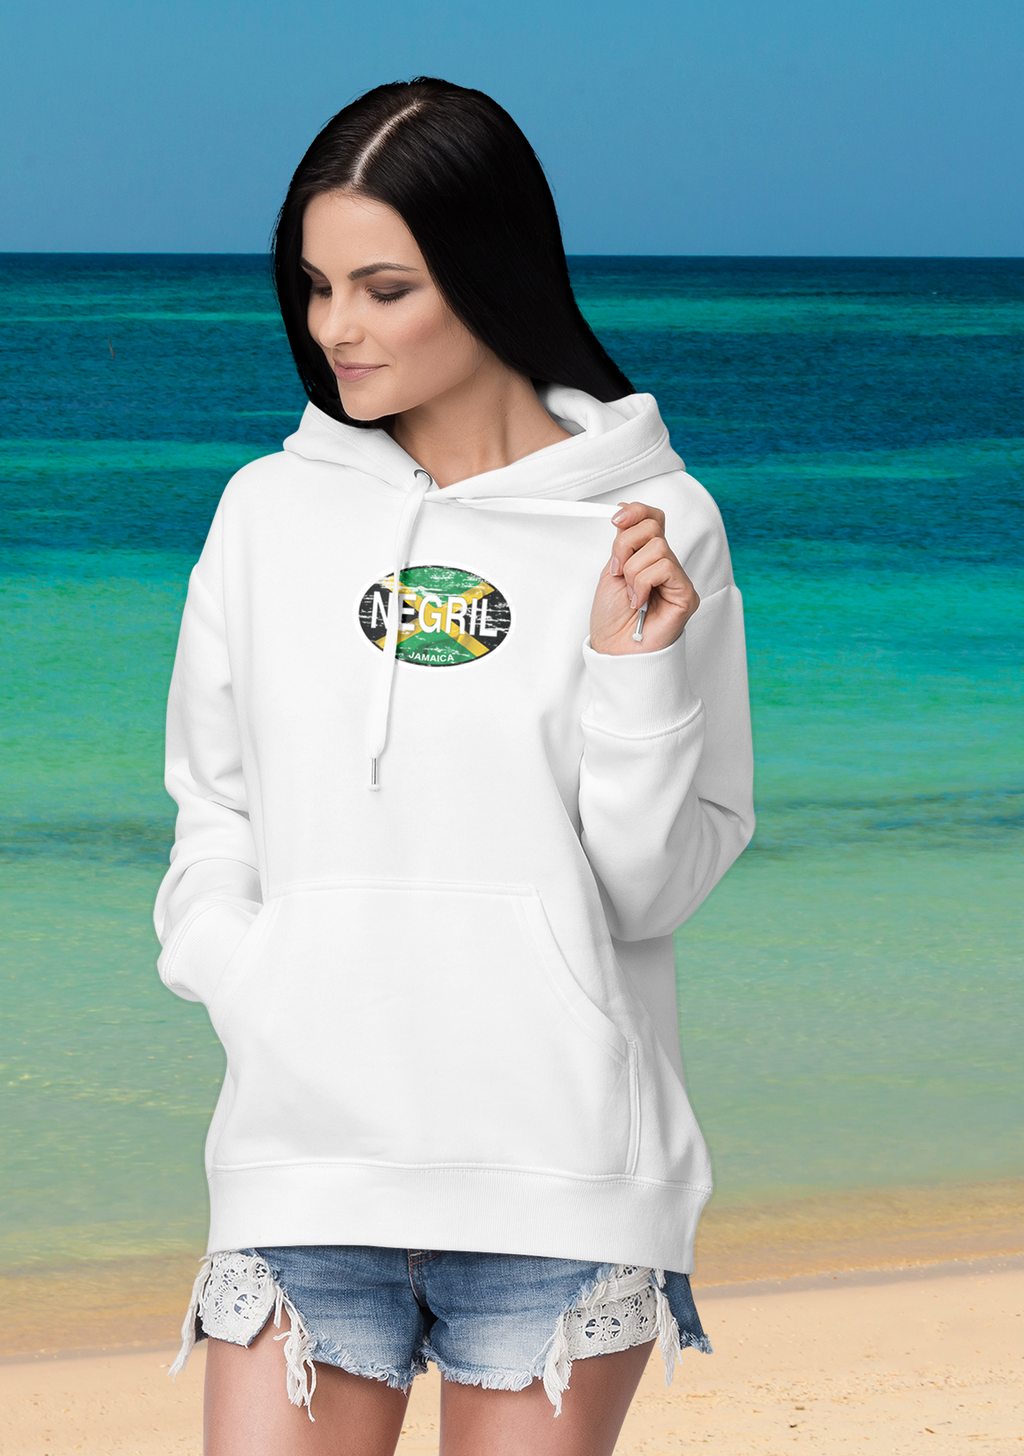 Negril Men's and Women's Flag Adult Hoodie - My Destination Location